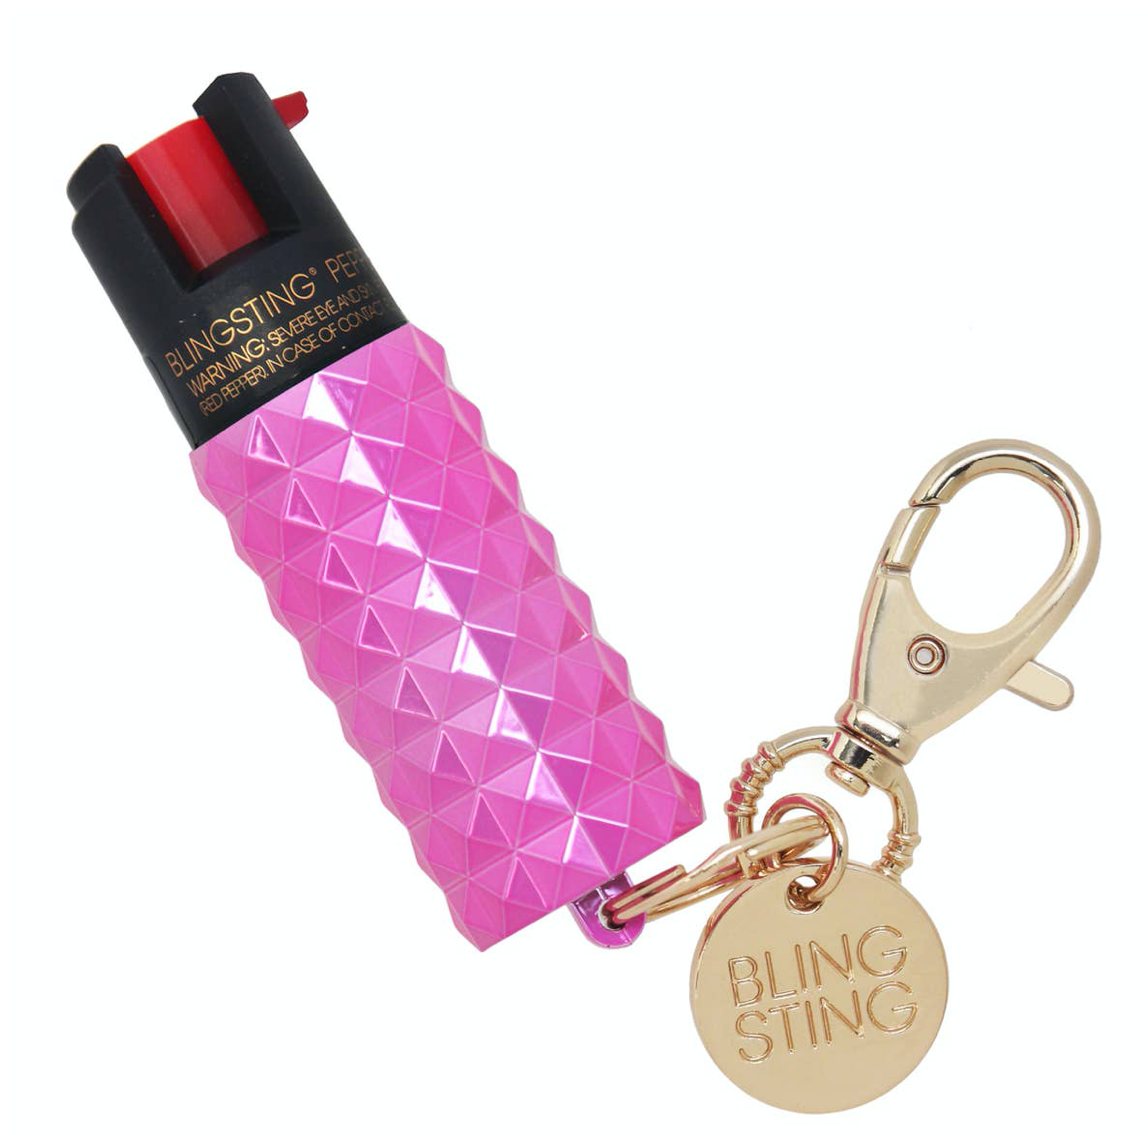 Bling Sting Pepper Spray – SouthernSass Boutique